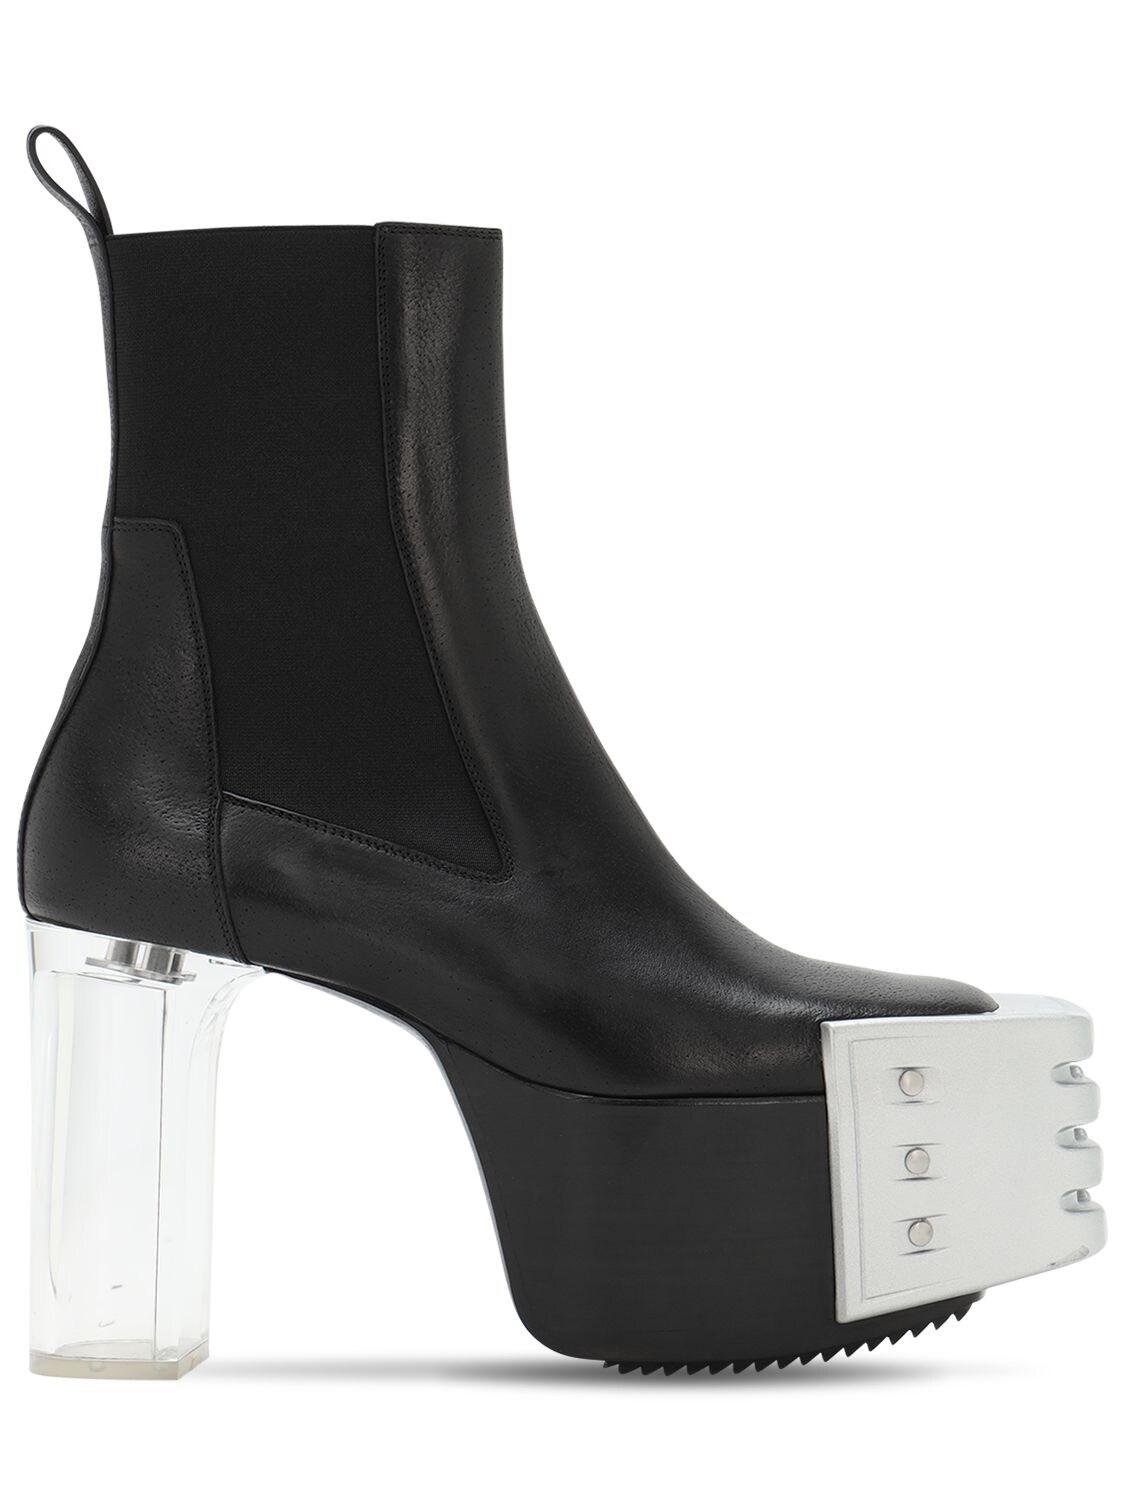 Rick Owens 125mm Grill Kiss Leather Boots in Black/Silver (Black 